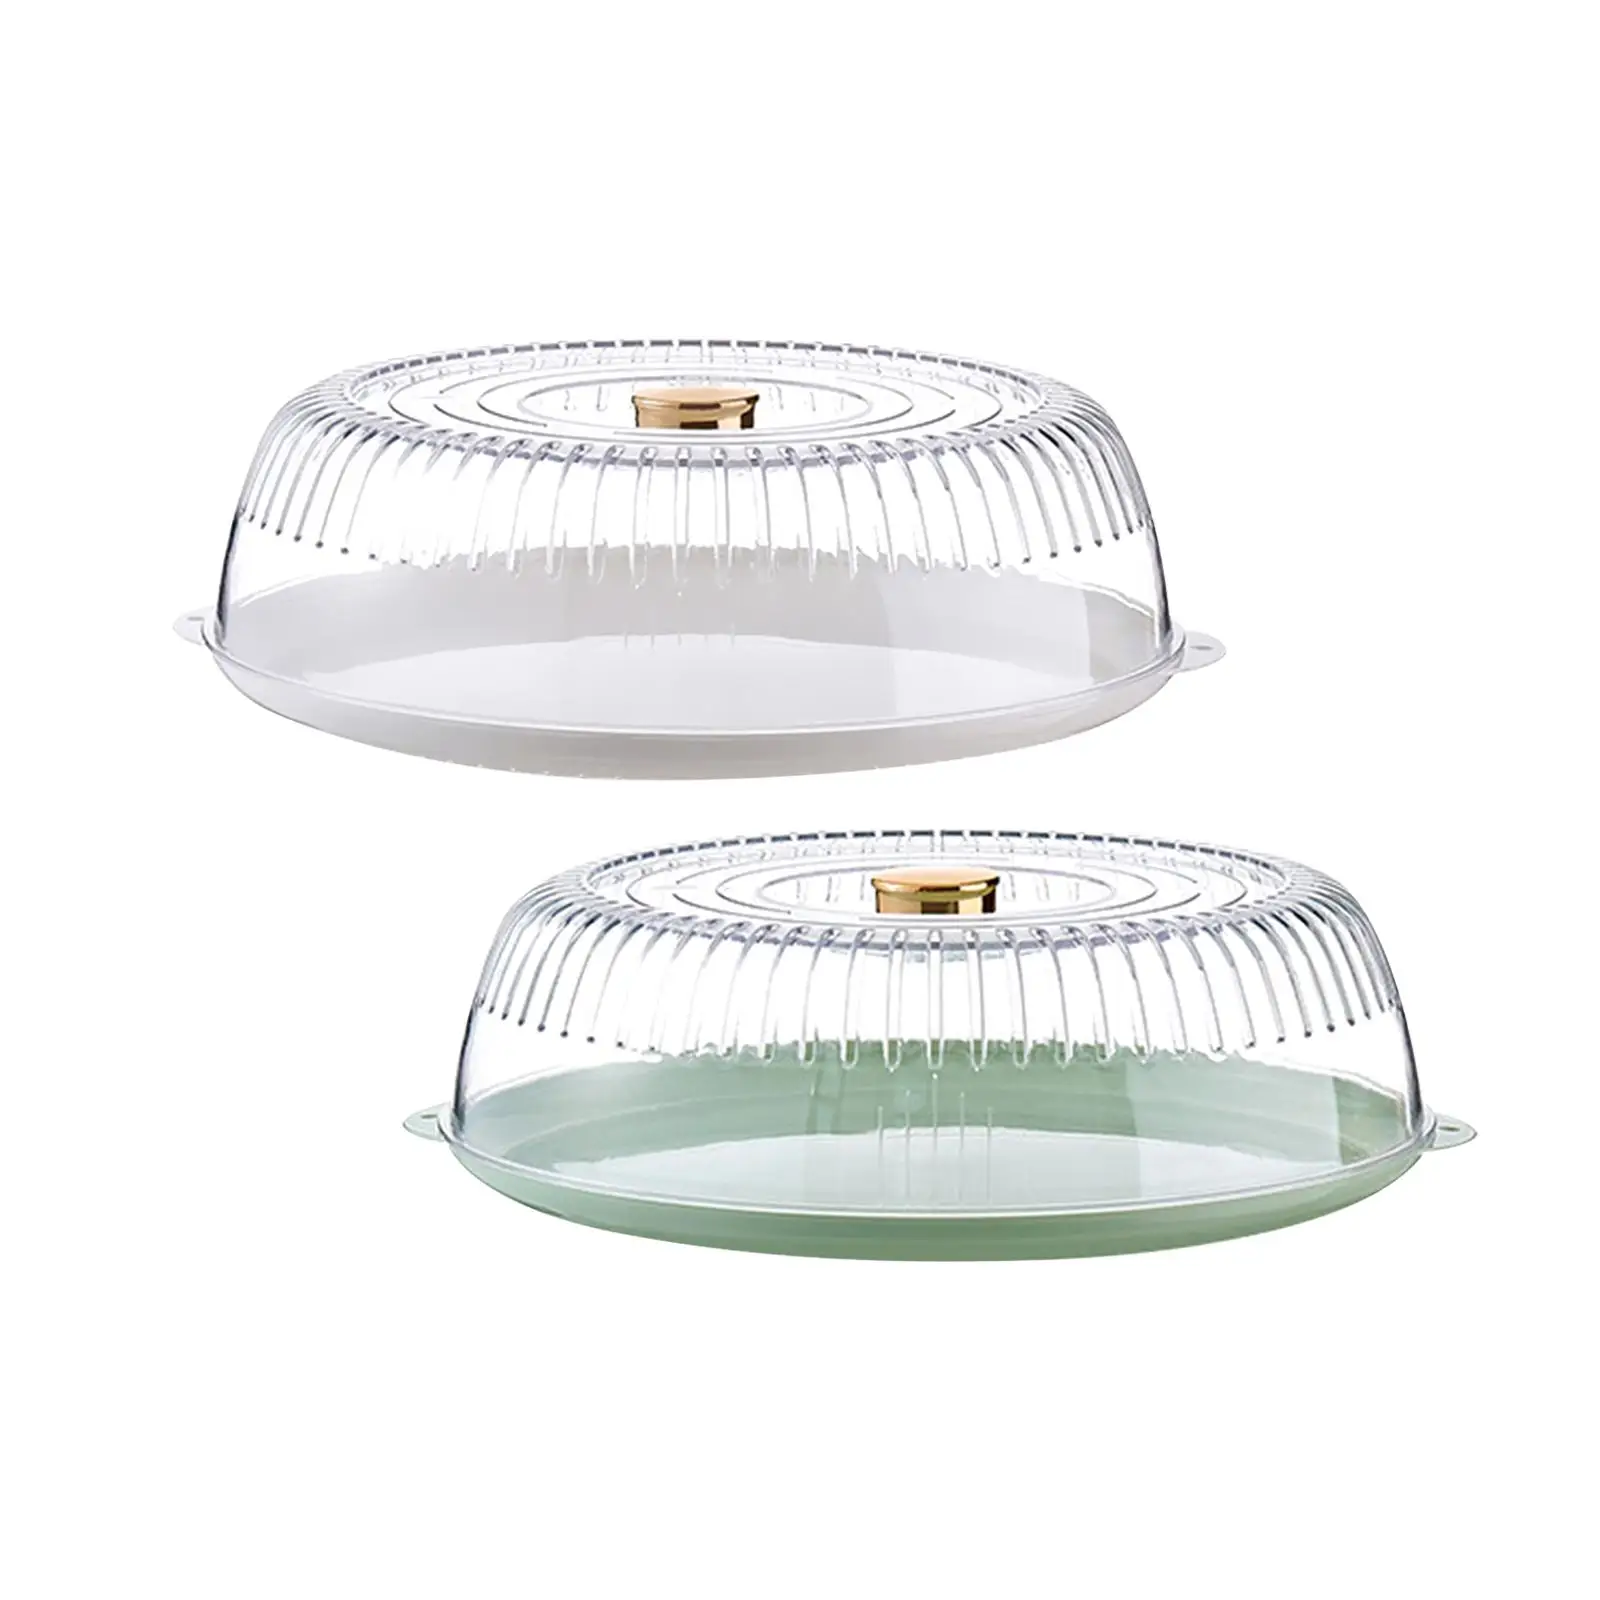 Transparent Leftovers Cover food Hollow Household Container for Restaurant Indoor Kitchen Outdoor Vegetable